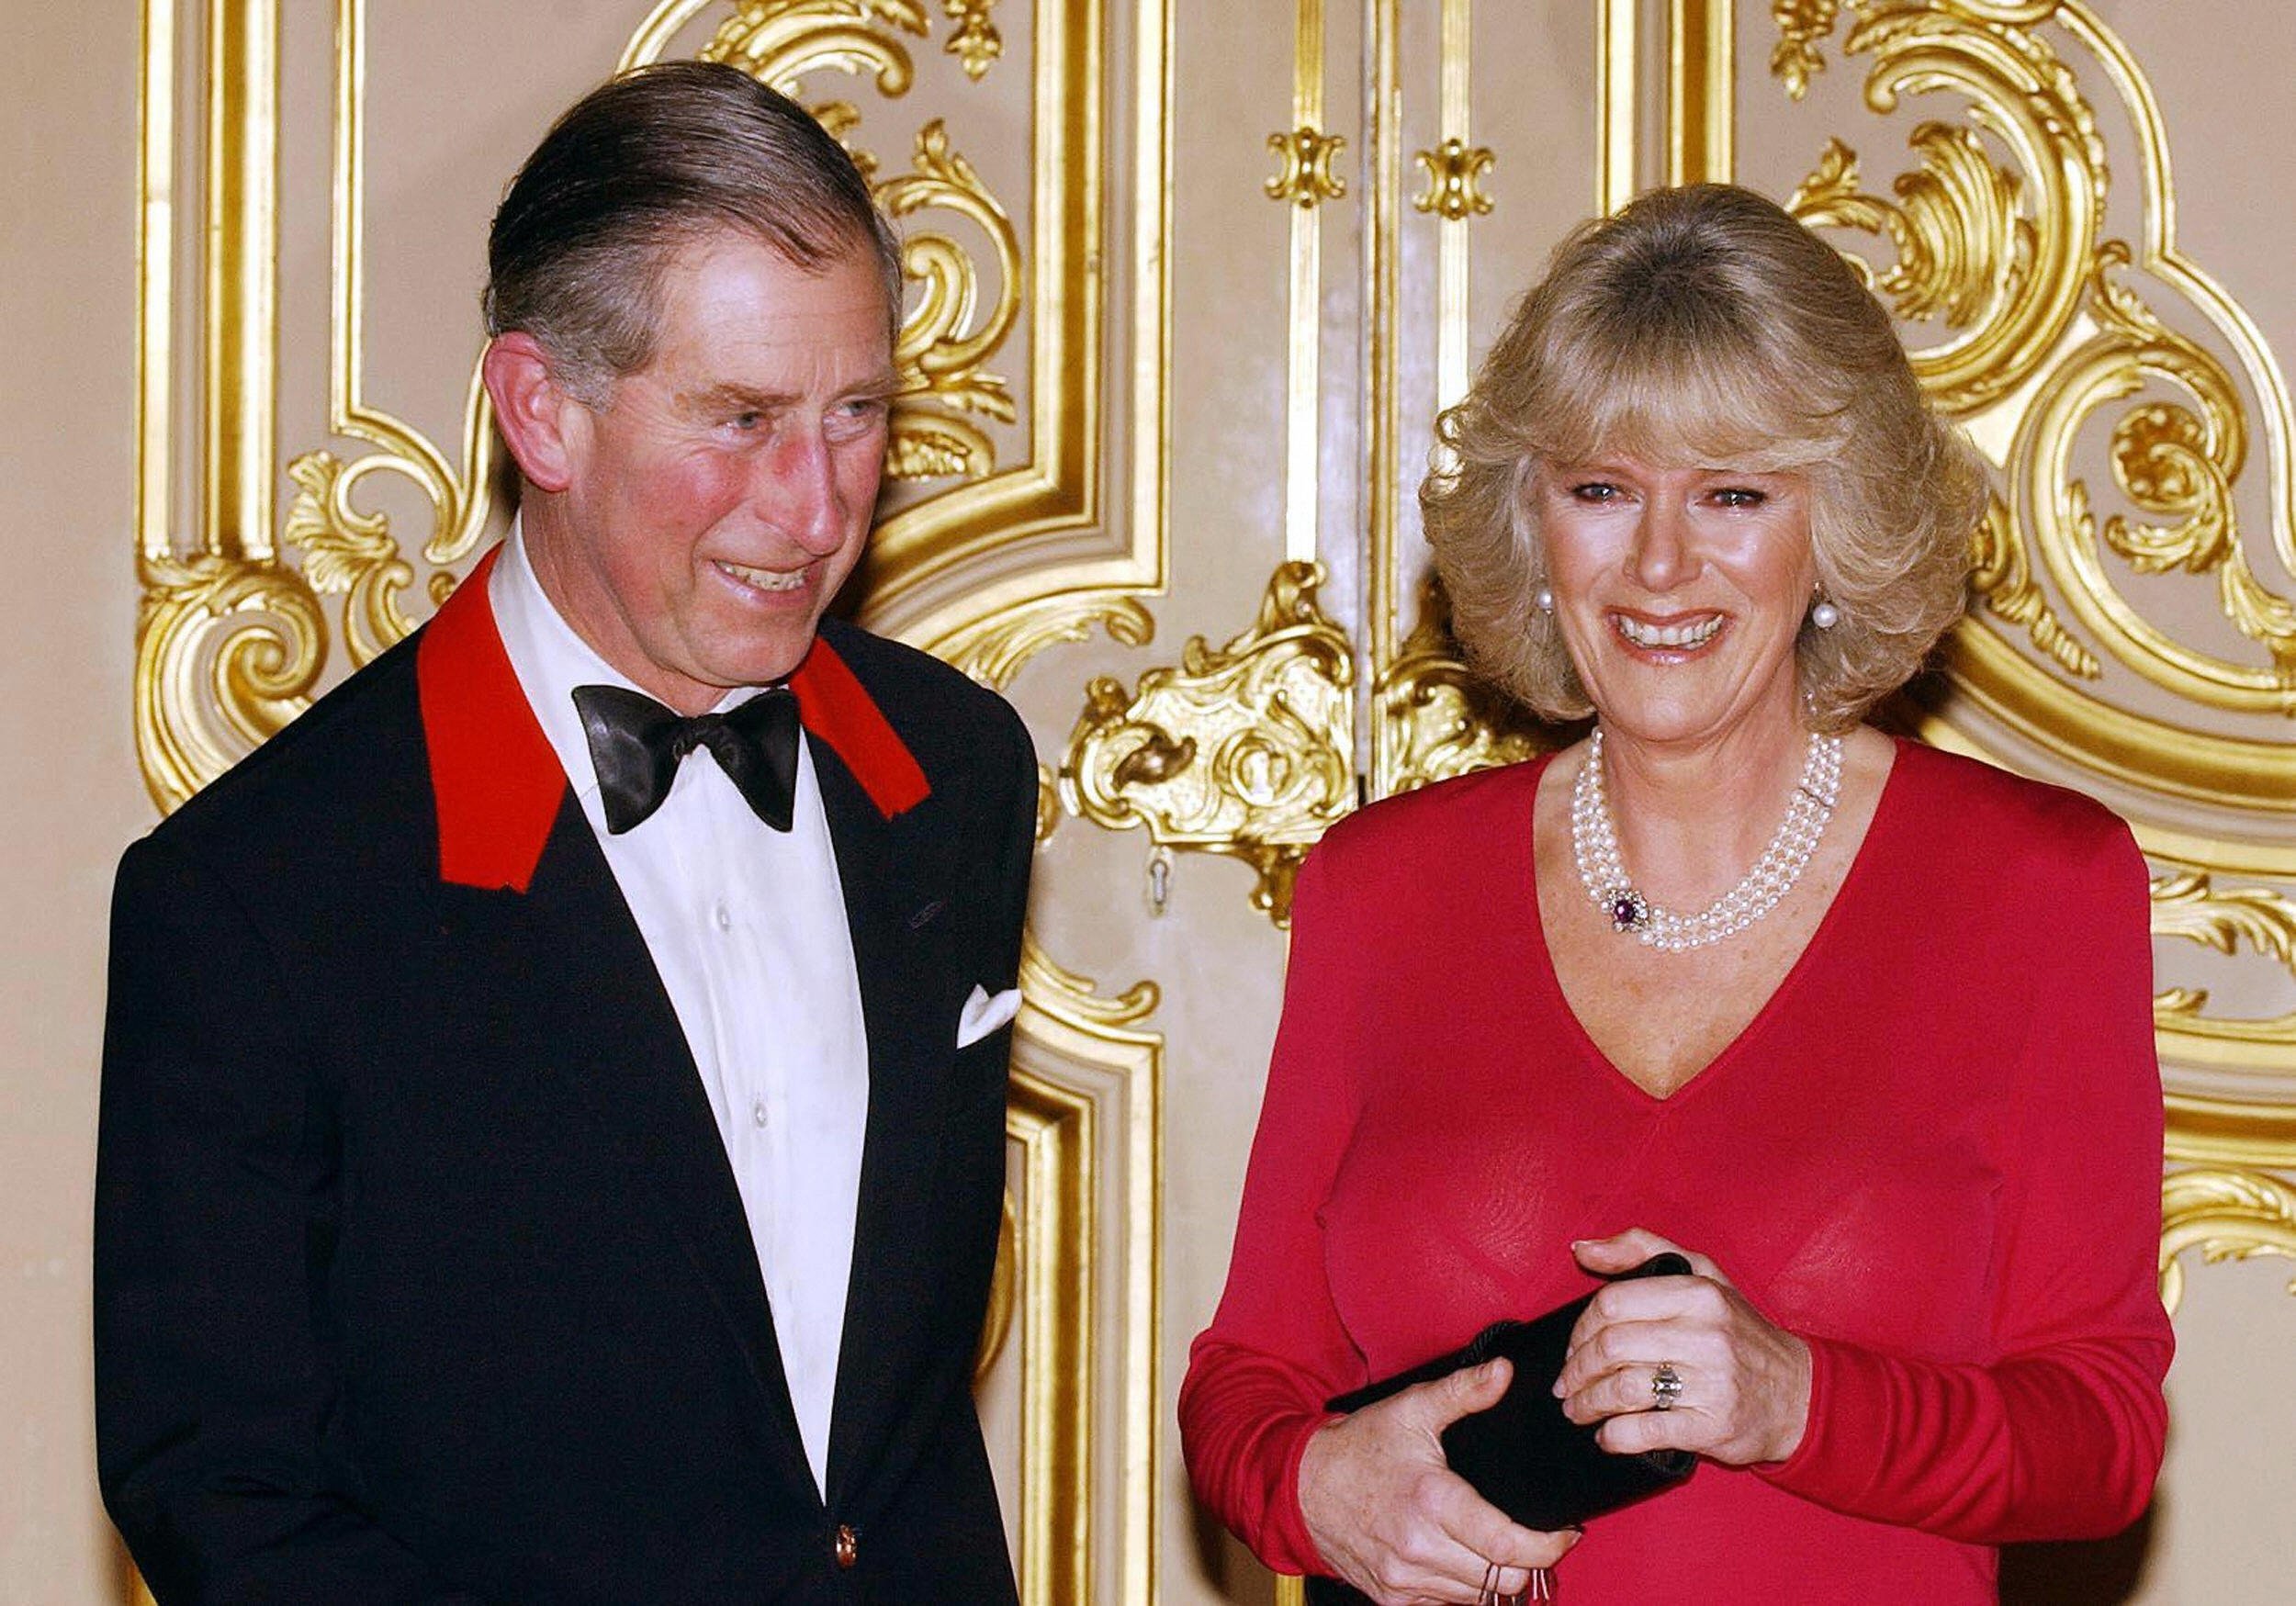 King Charles and Queen Consort Camilla Parker Bowles attend an event.